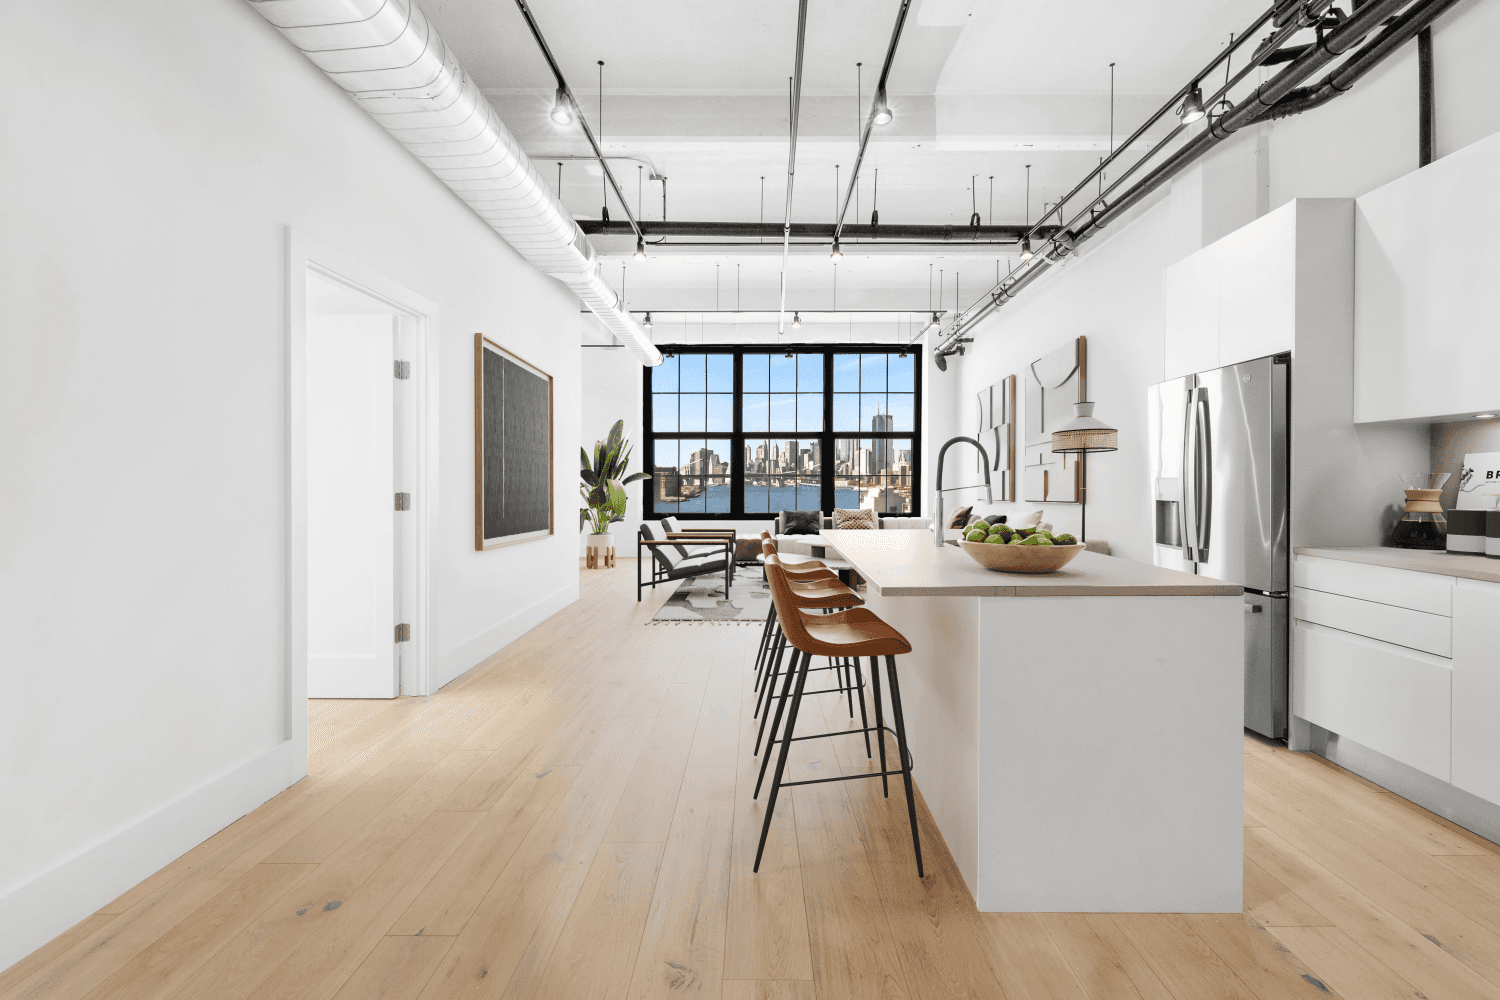 Experience a luxurious rental lifestyle in one of the city's most desirable waterfront neighborhoods in this impeccably crafted 2 bedroom, 2 bathroom corner apartment at Williamsburg Lofts.